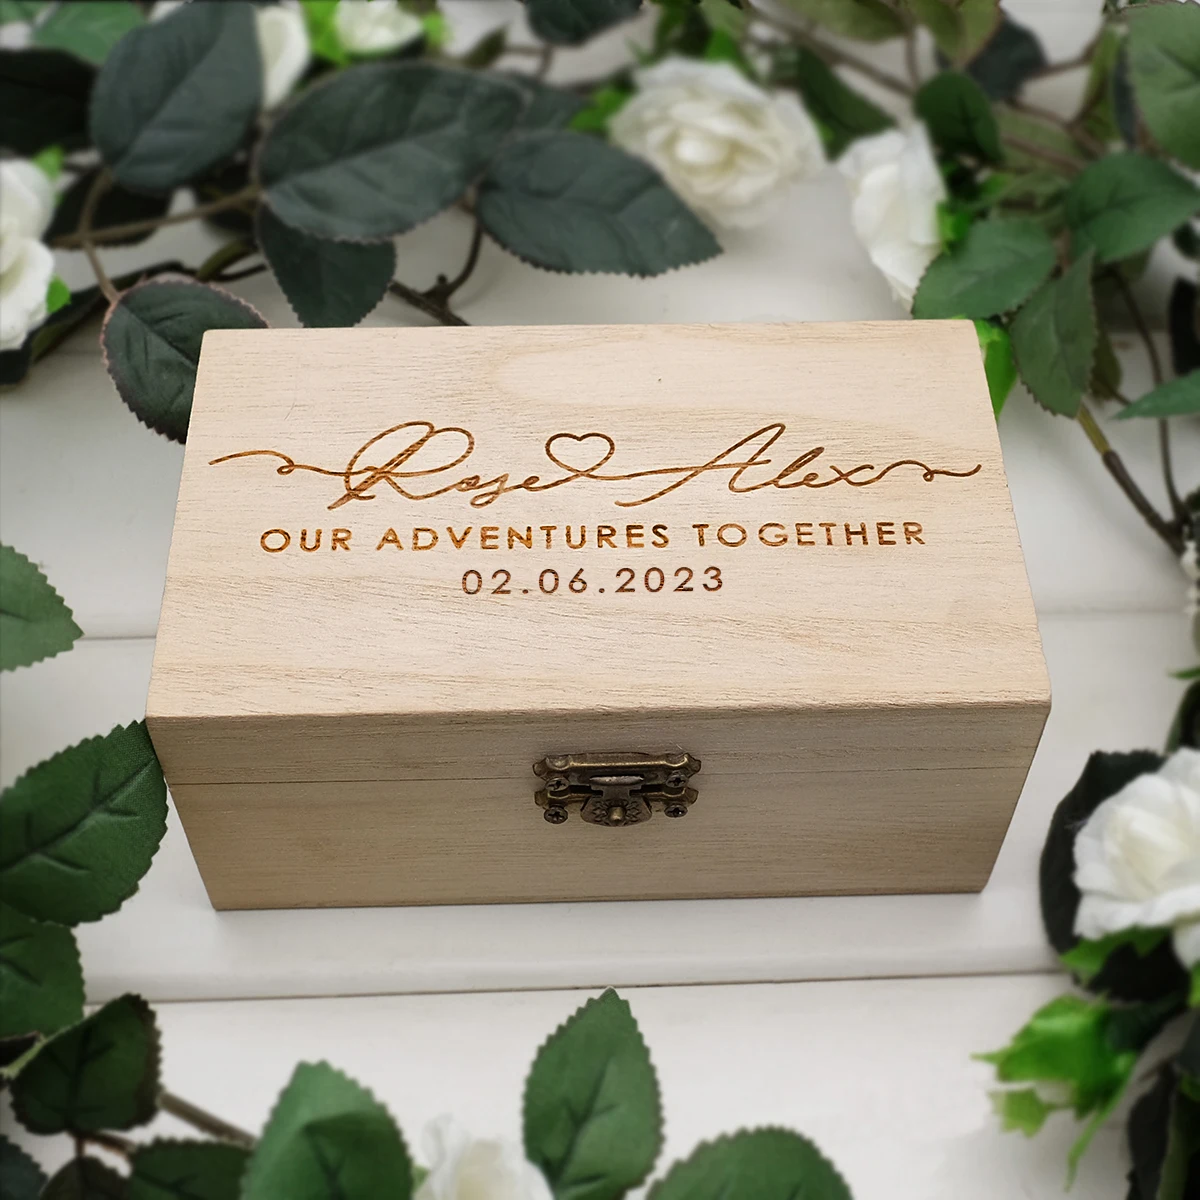 

Personalized Ring Box Custom Rings Holder Engraved Wood Rustic Wedding Ring Bearer Box Customized Engagement Proposal Gift